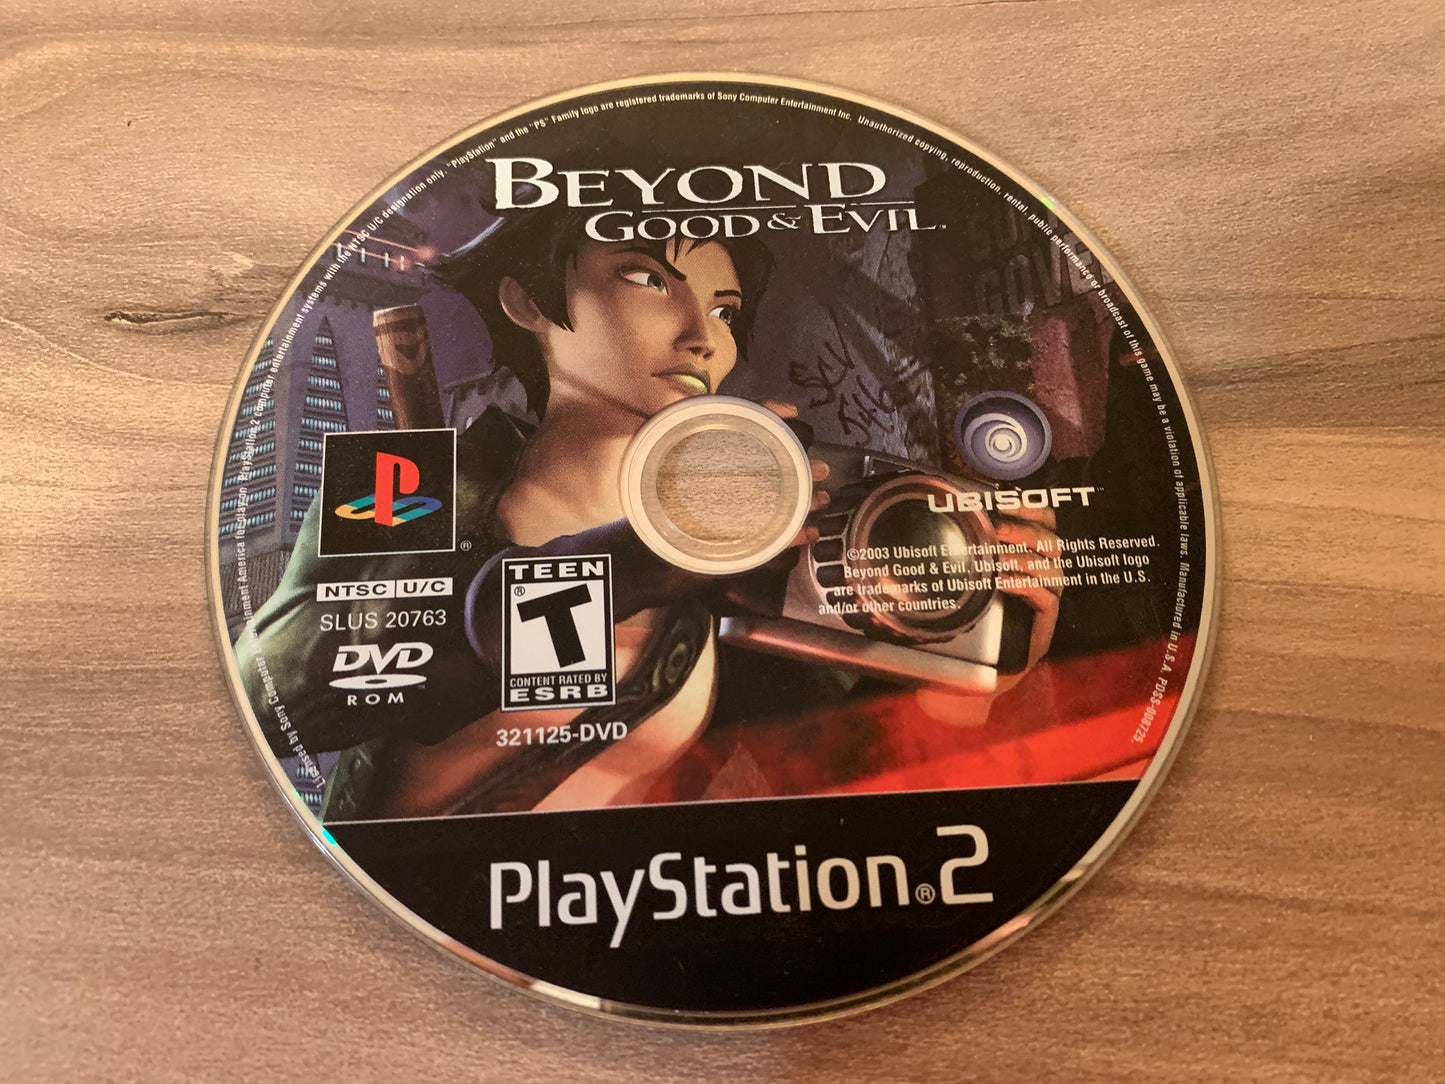 SONY PLAYSTATiON 2 [PS2] | BEYOND GOOD & EViL